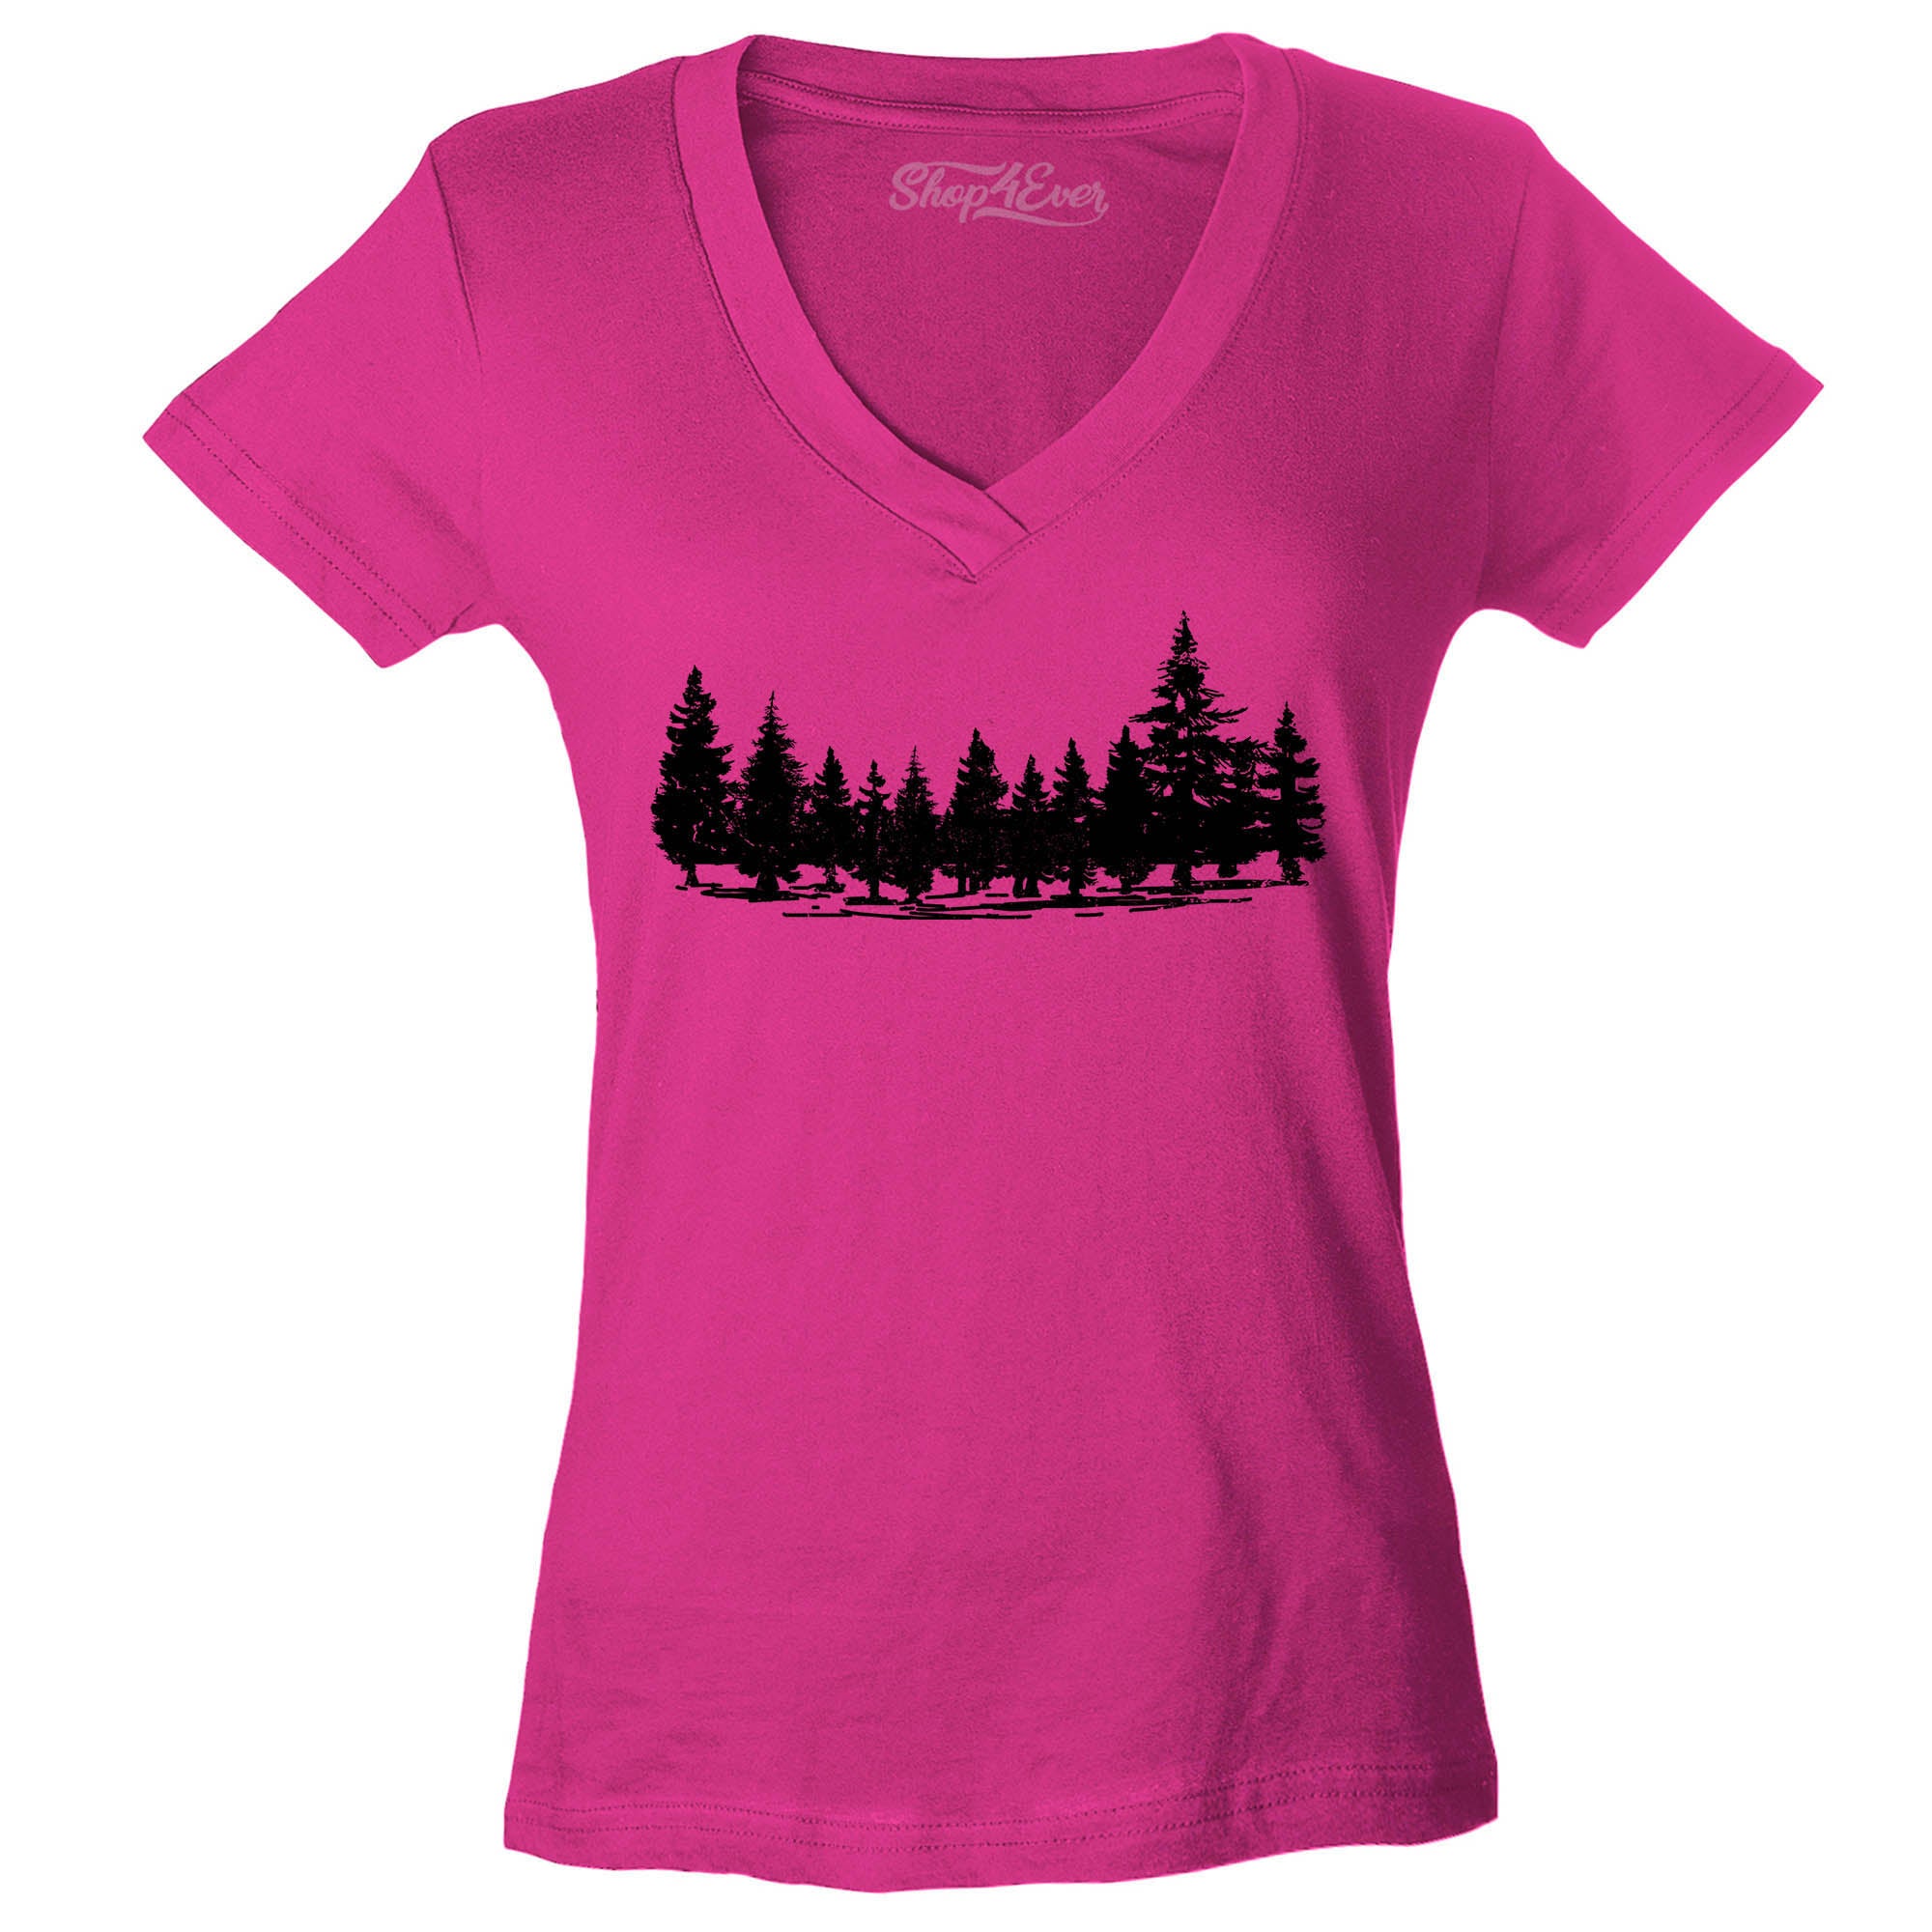 Forest Trees Nature Mountains Wildlife Women's V-Neck T-Shirt Slim Fit